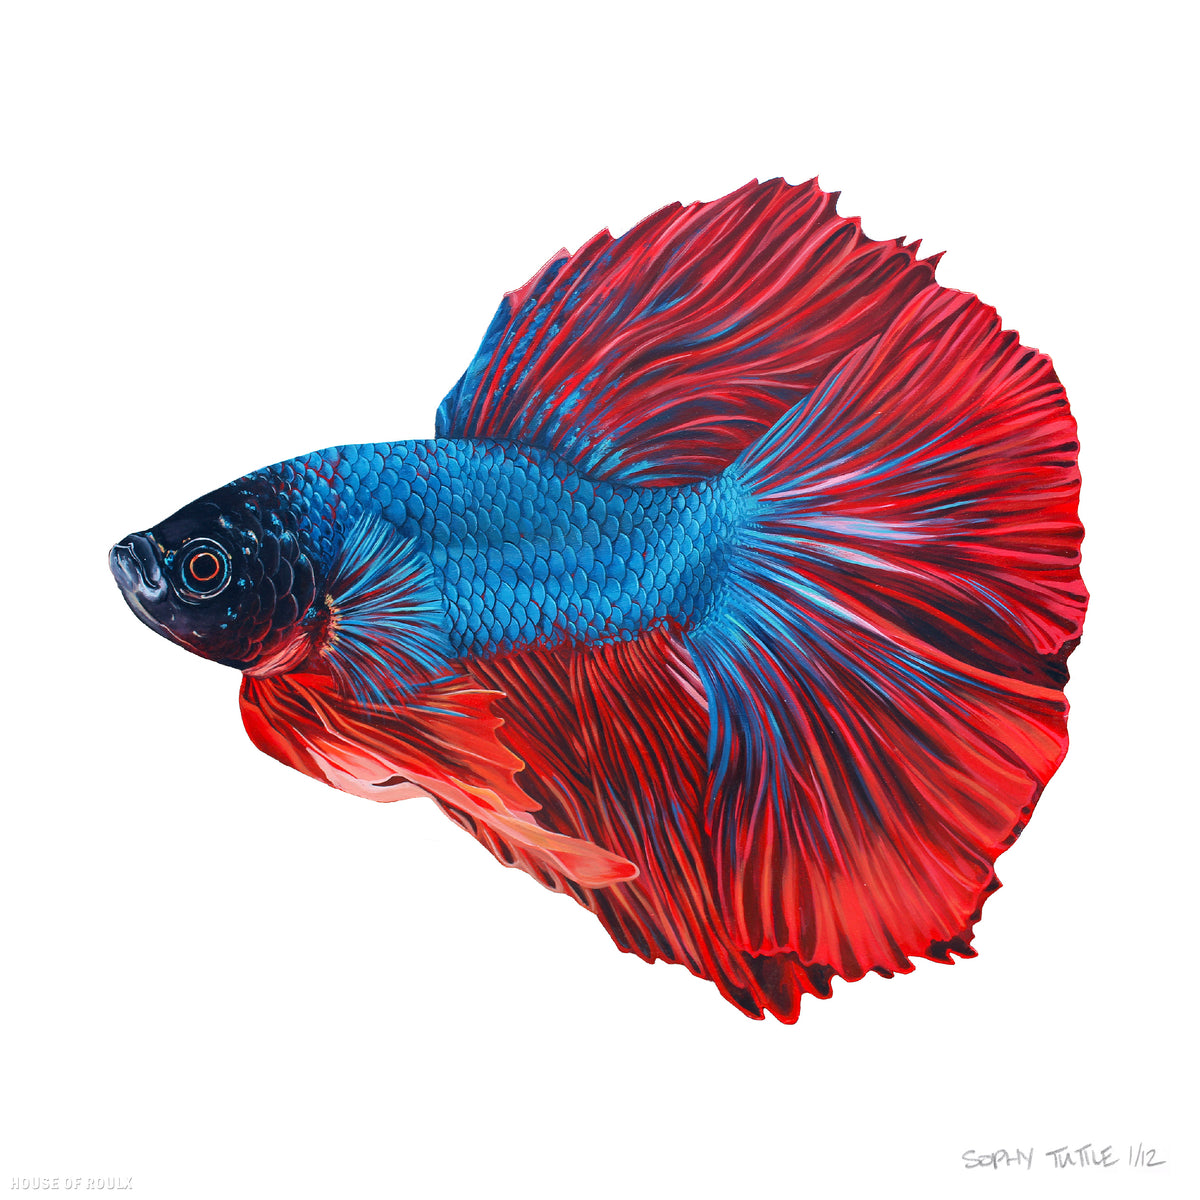 Sophy Tuttle - &quot;Floating Fish 1&quot; - Archival Print, Limited Edition of 12 - 12 x 12&quot;